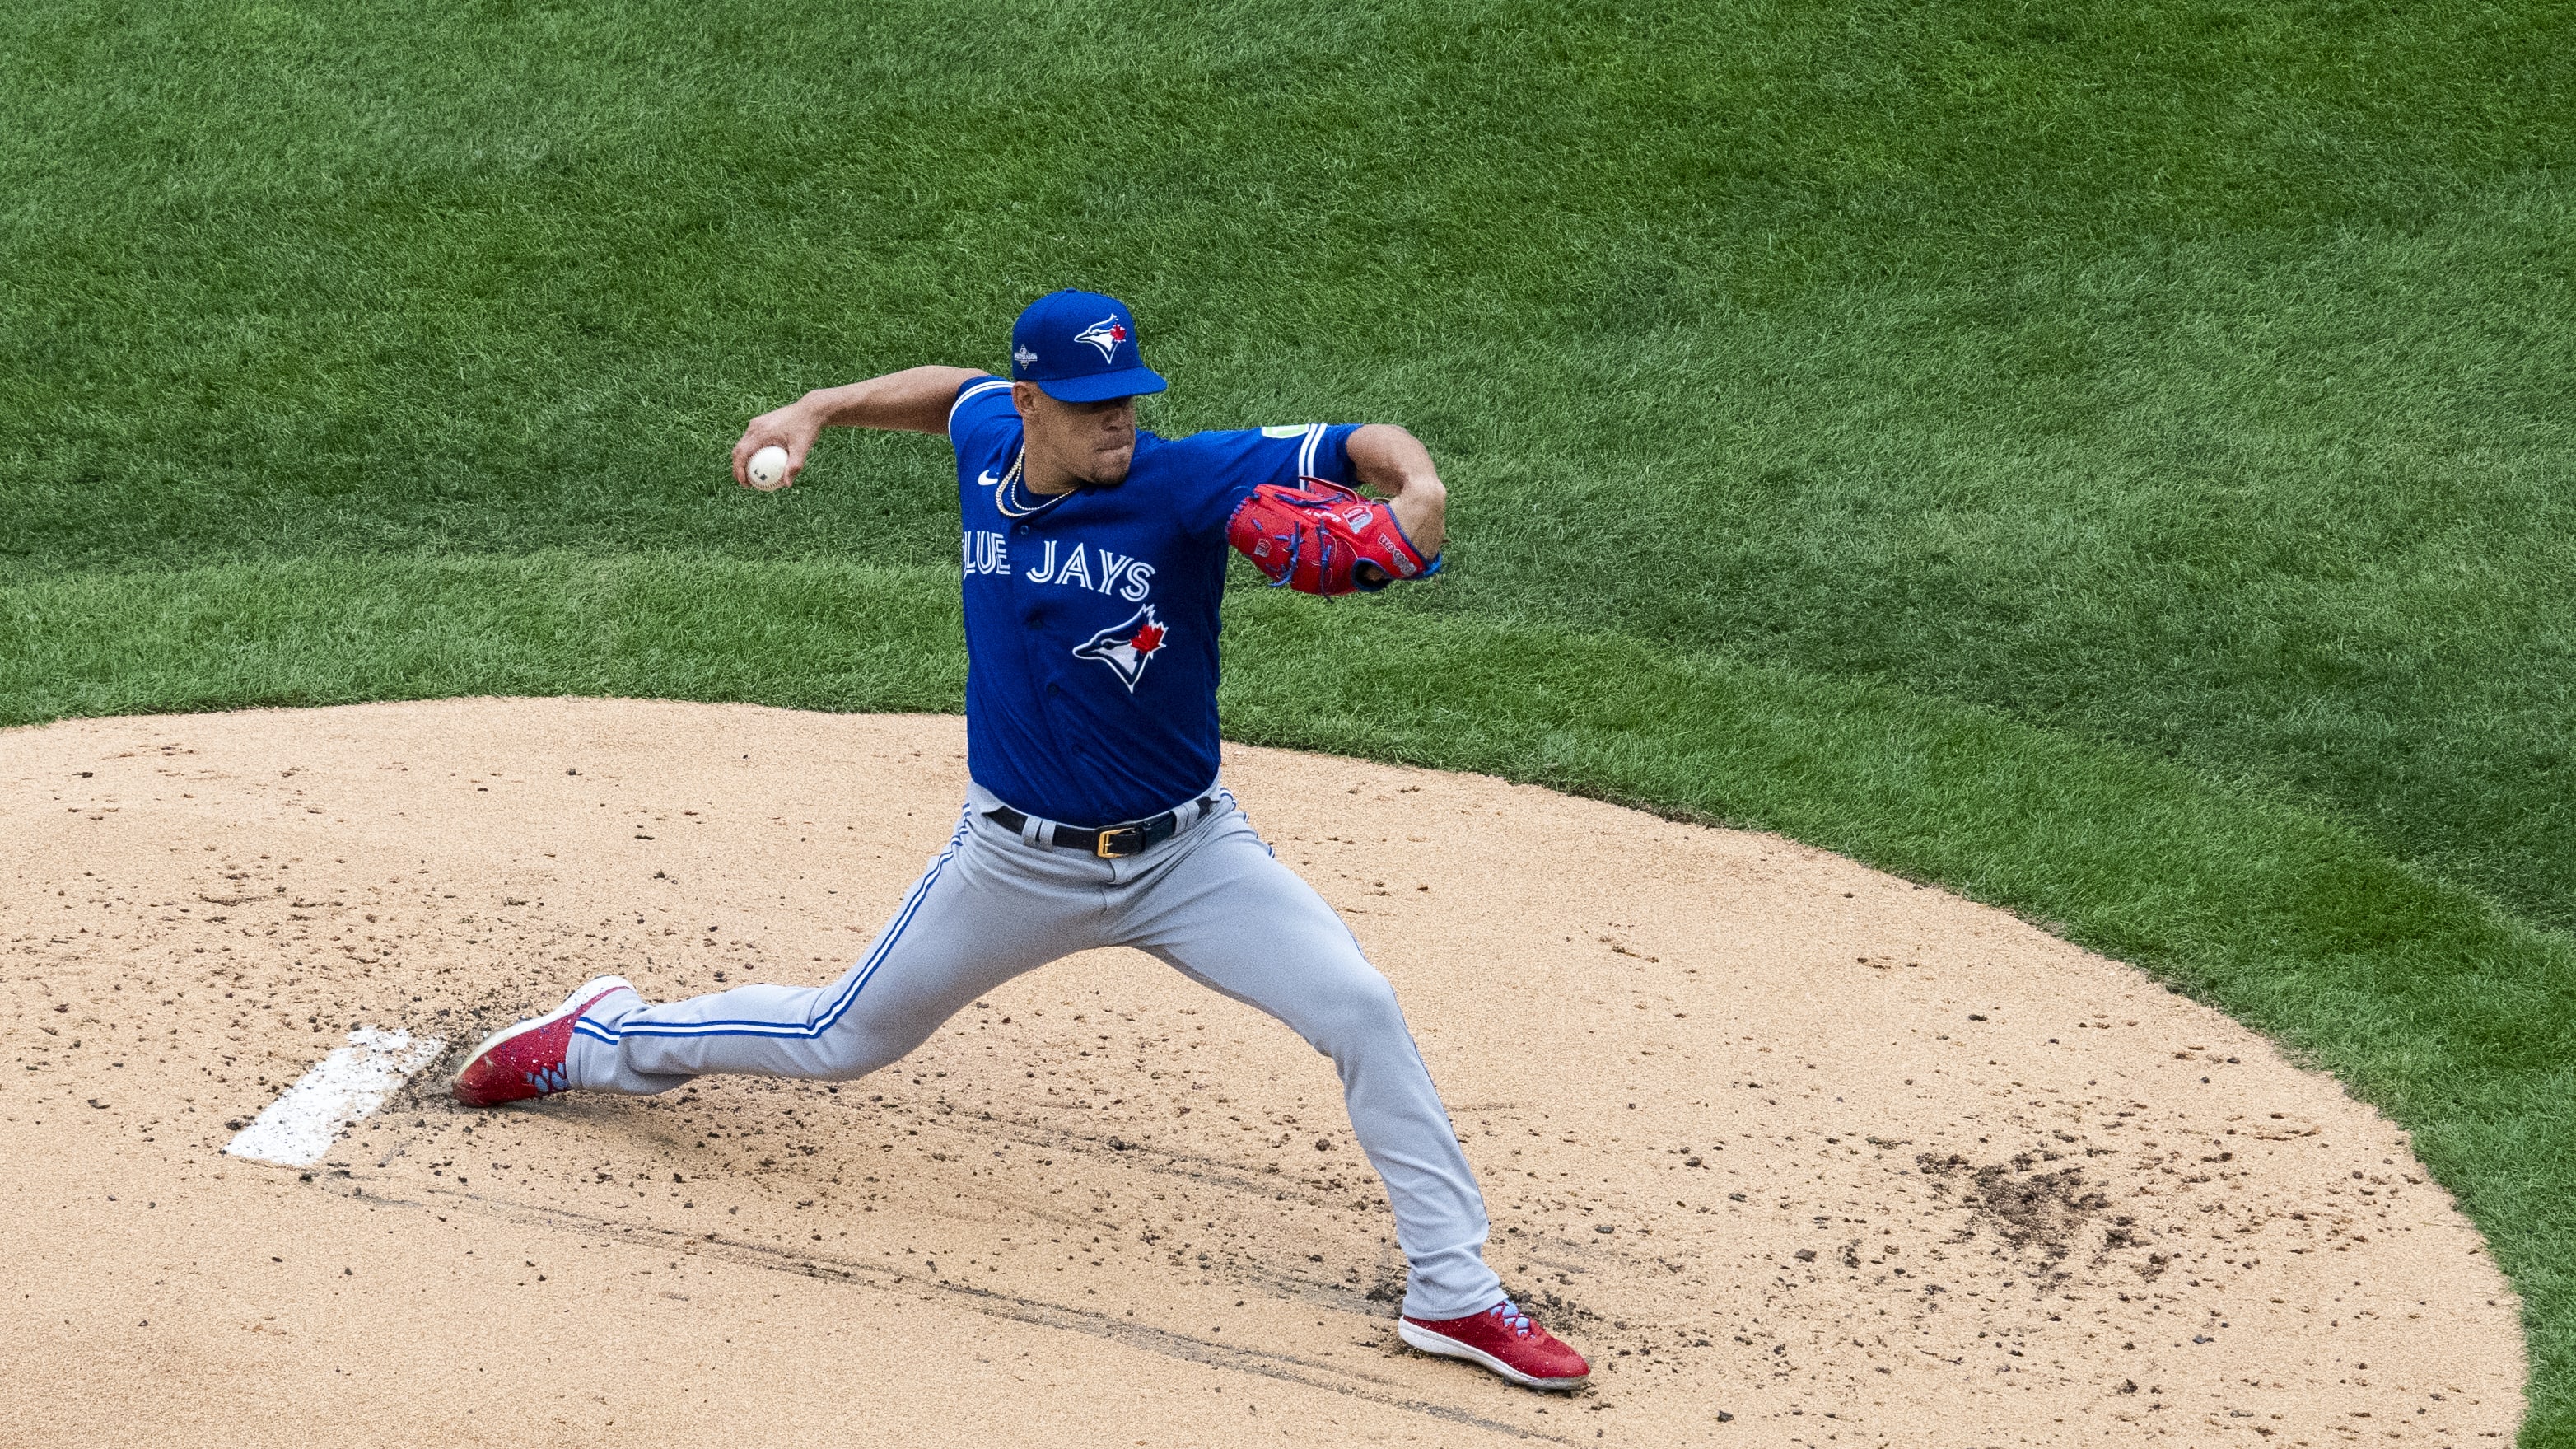 RHP Jose Berrios on the mound in Game 2 of the AL Wild Card Series between the Toronto Blue Jays and Minnesota Twins.